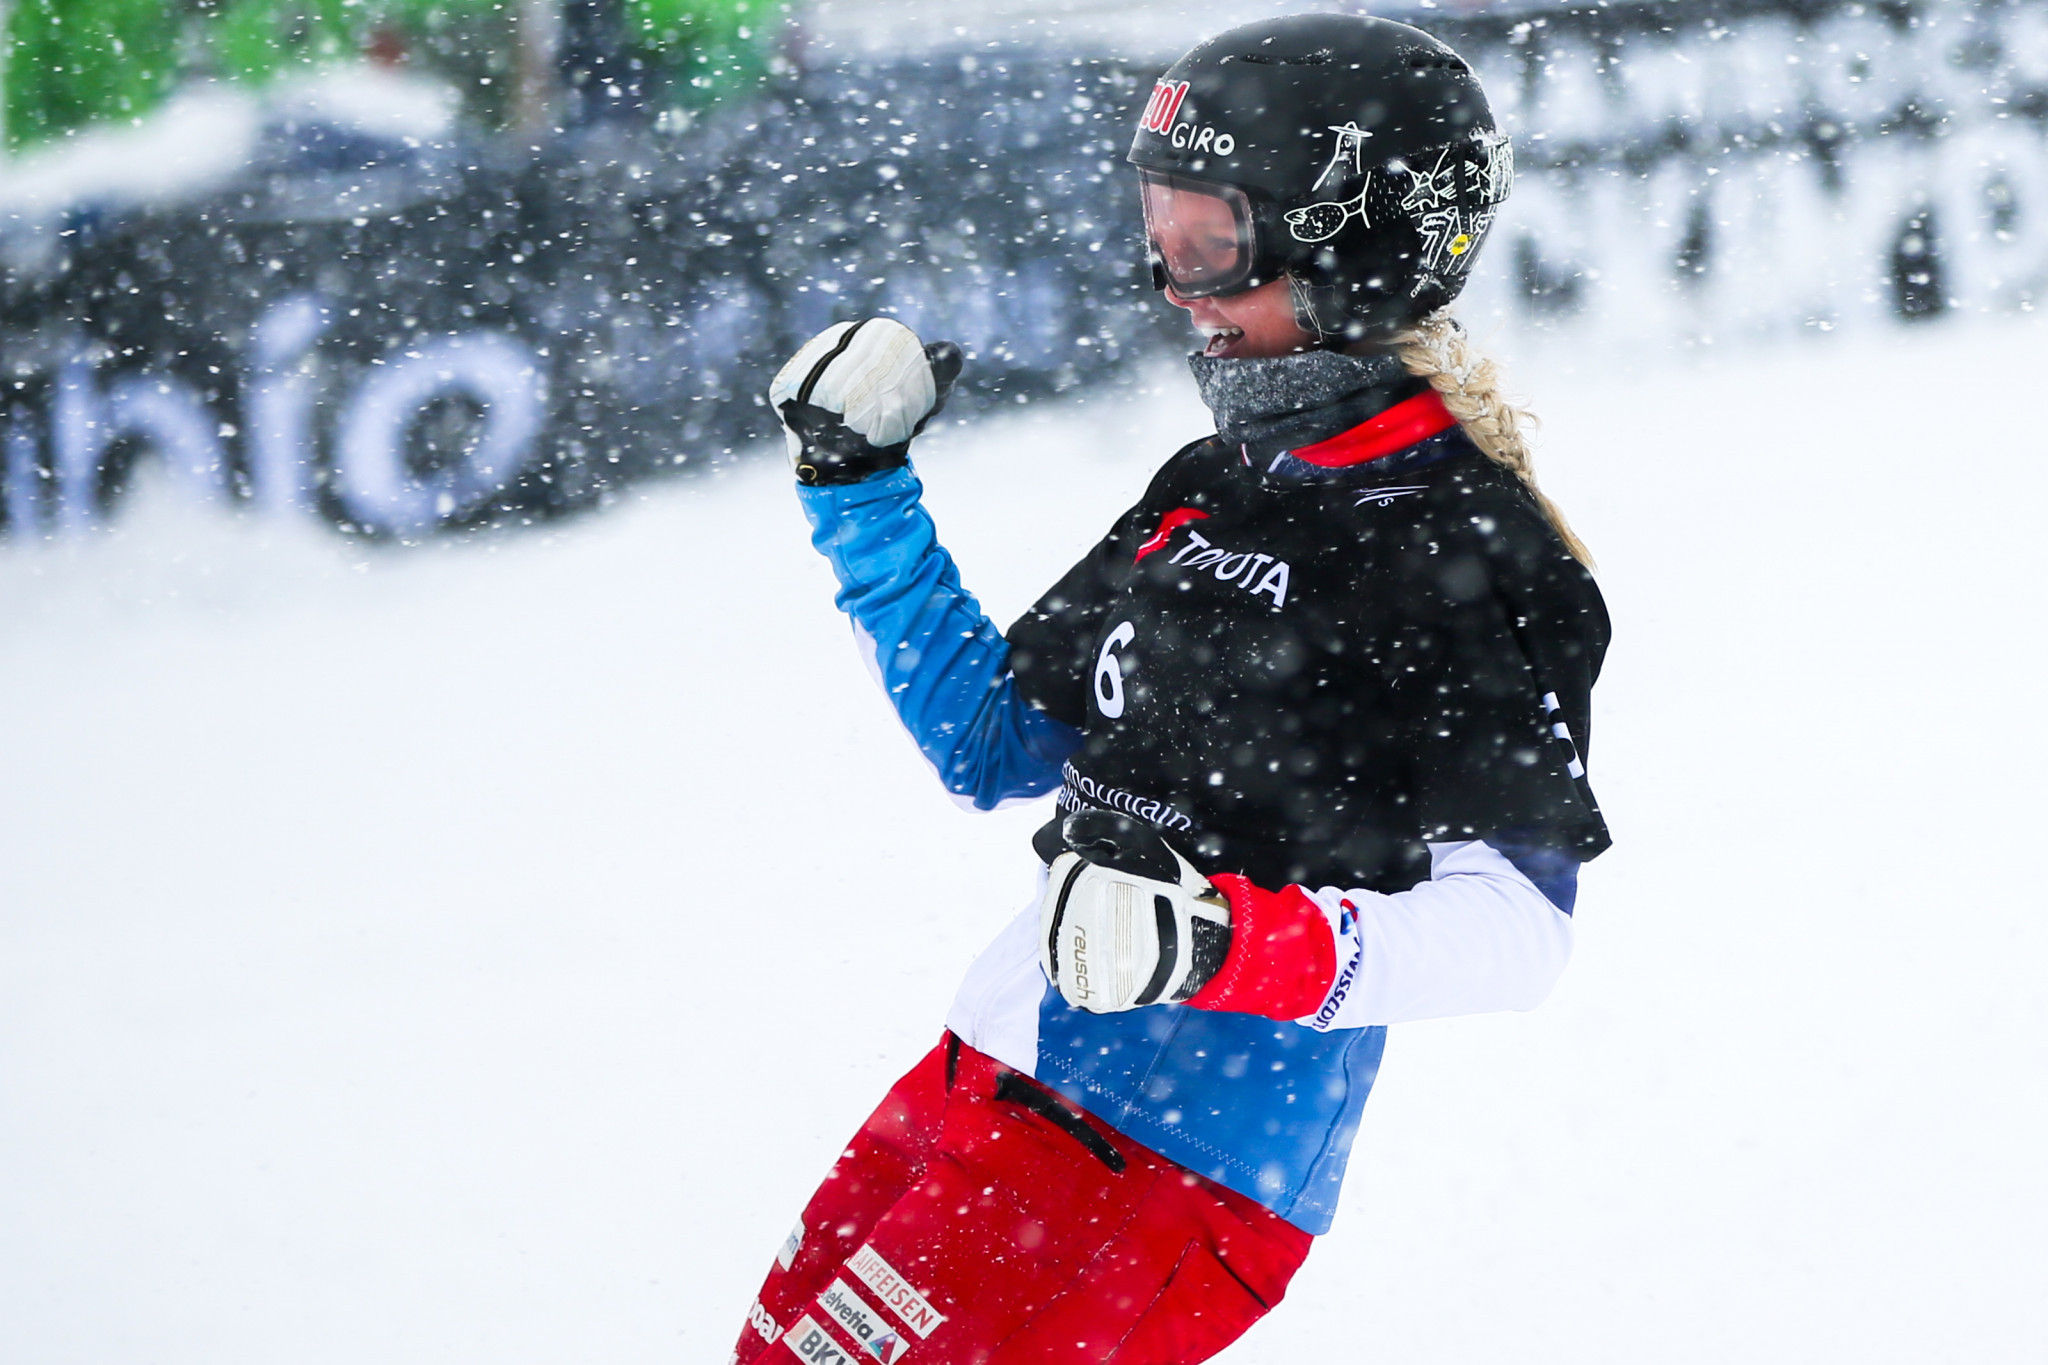 Zogg scrambles to FIS parallel slalom crystal globe with 13th-place finish in Winterberg 